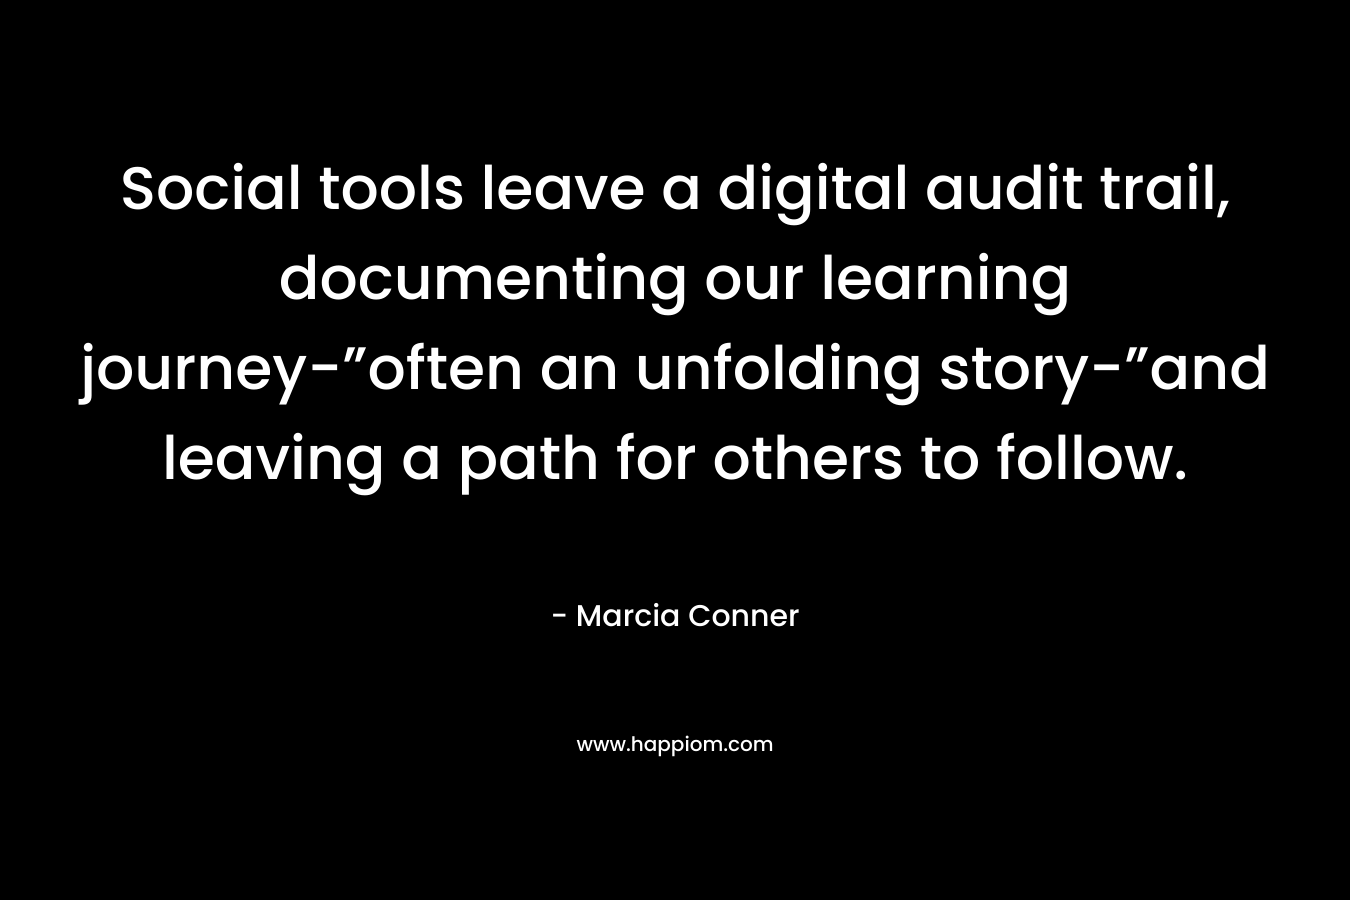 Social tools leave a digital audit trail, documenting our learning journey-”often an unfolding story-”and leaving a path for others to follow.